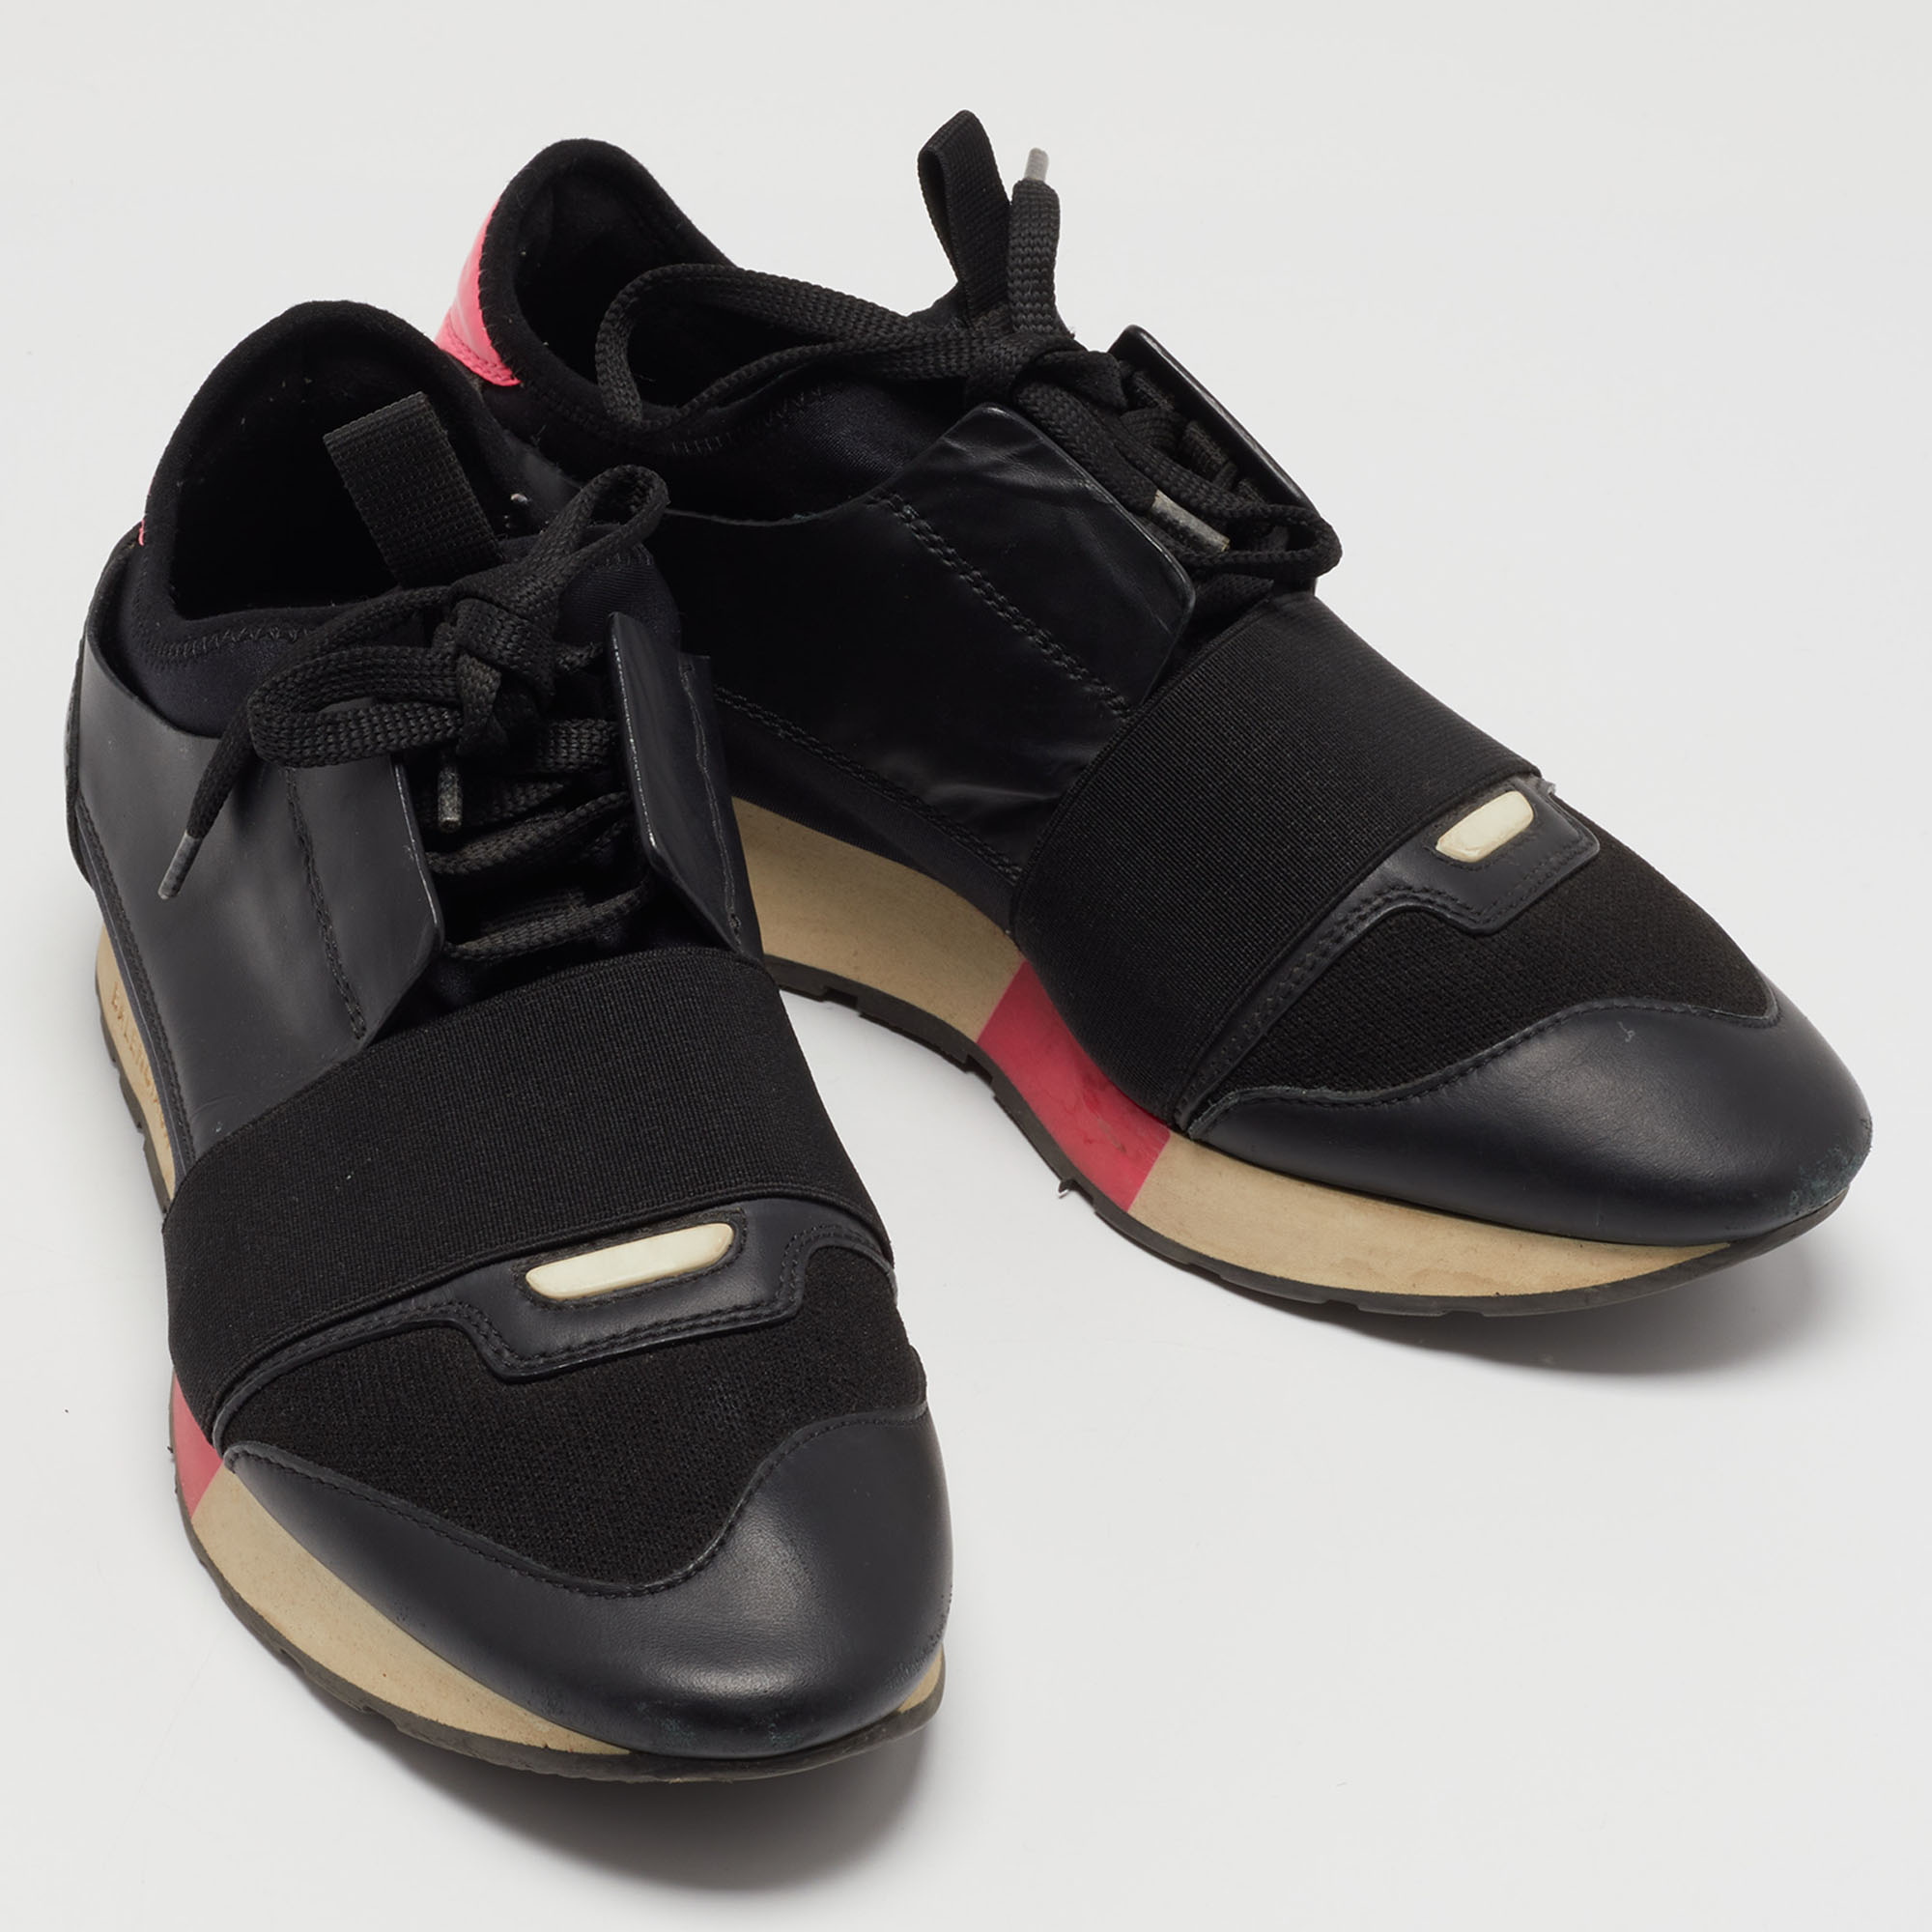 Balenciaga Black/Pink Leather And Fabric Race Runner Sneakers Size 38